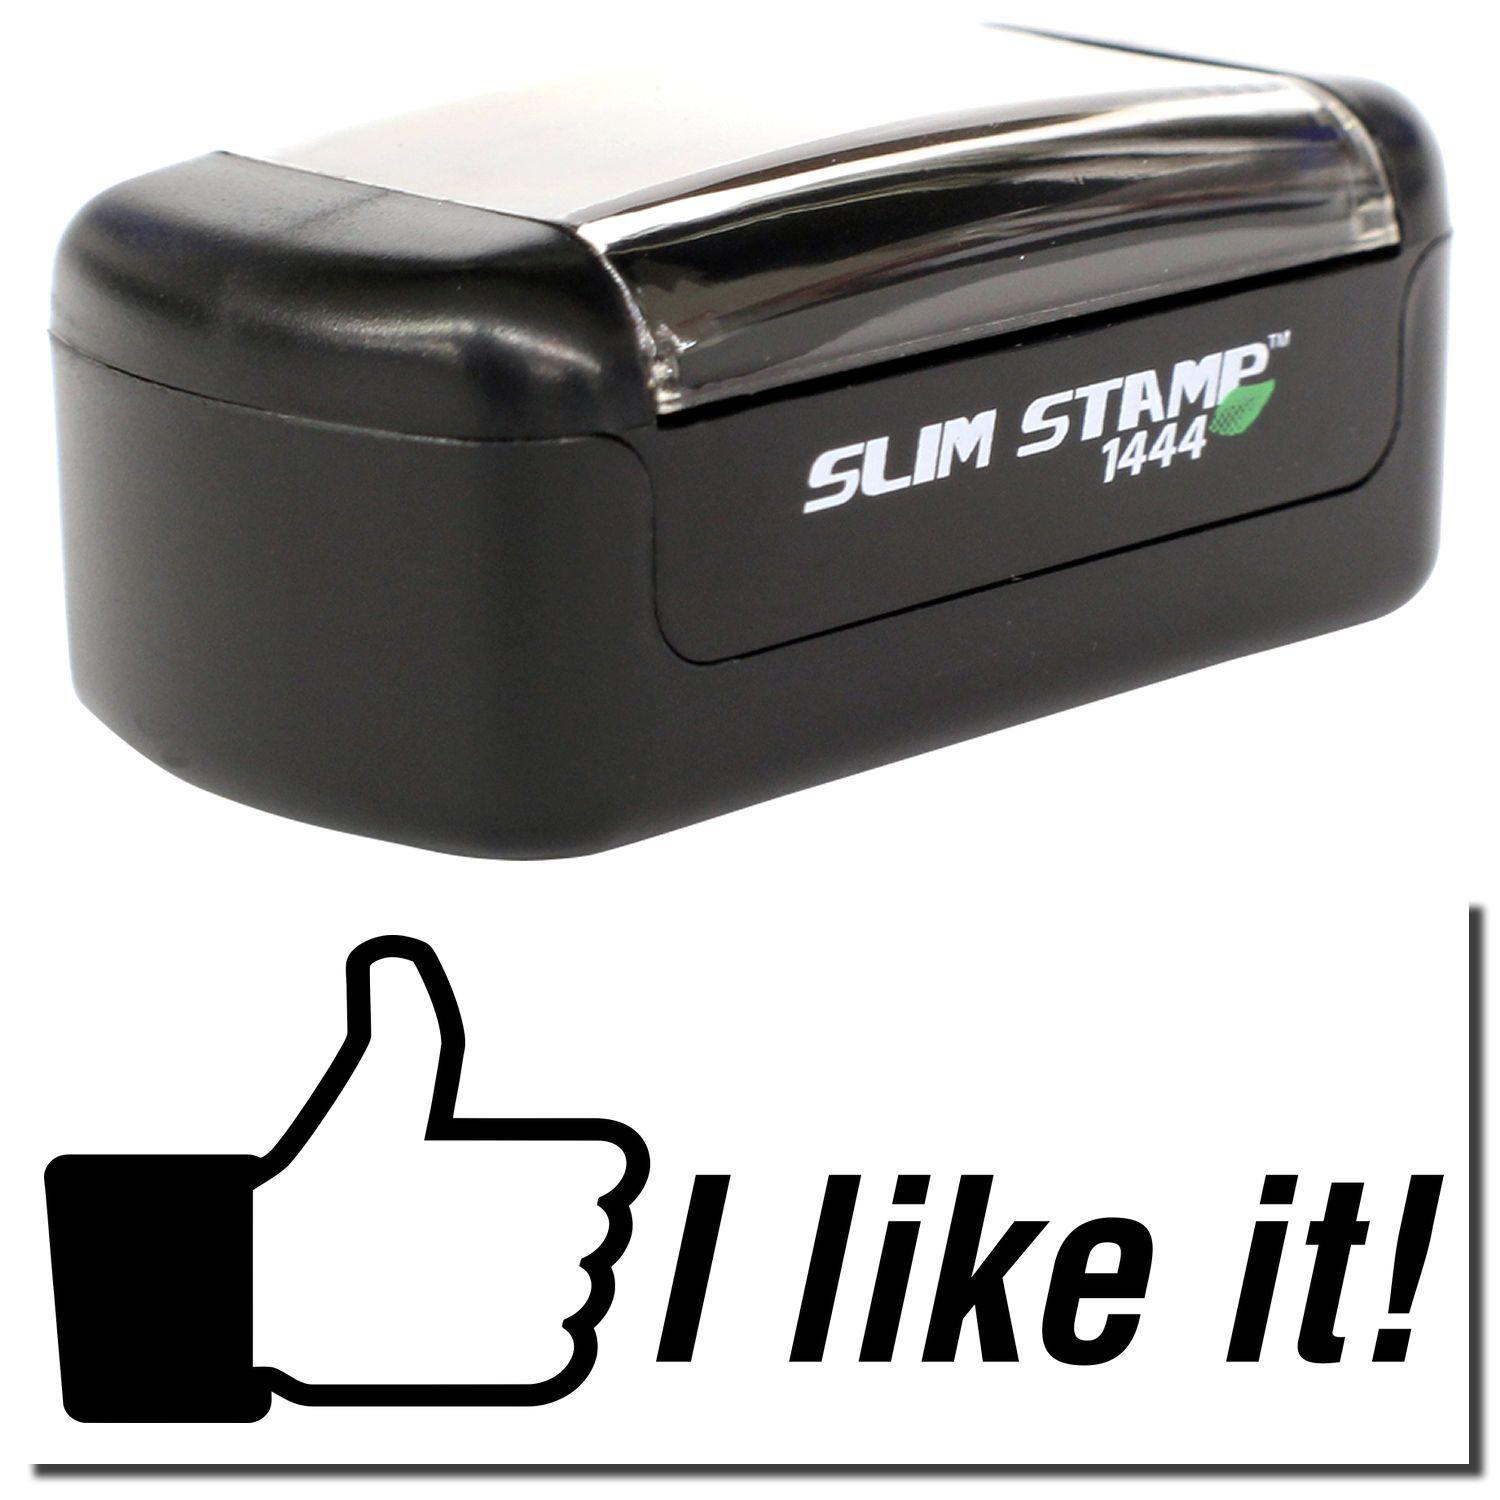 A stock office pre-inked stamp with a stamped image showing how the text "I like it!" with a thumbs-up icon on the left side is displayed after stamping.